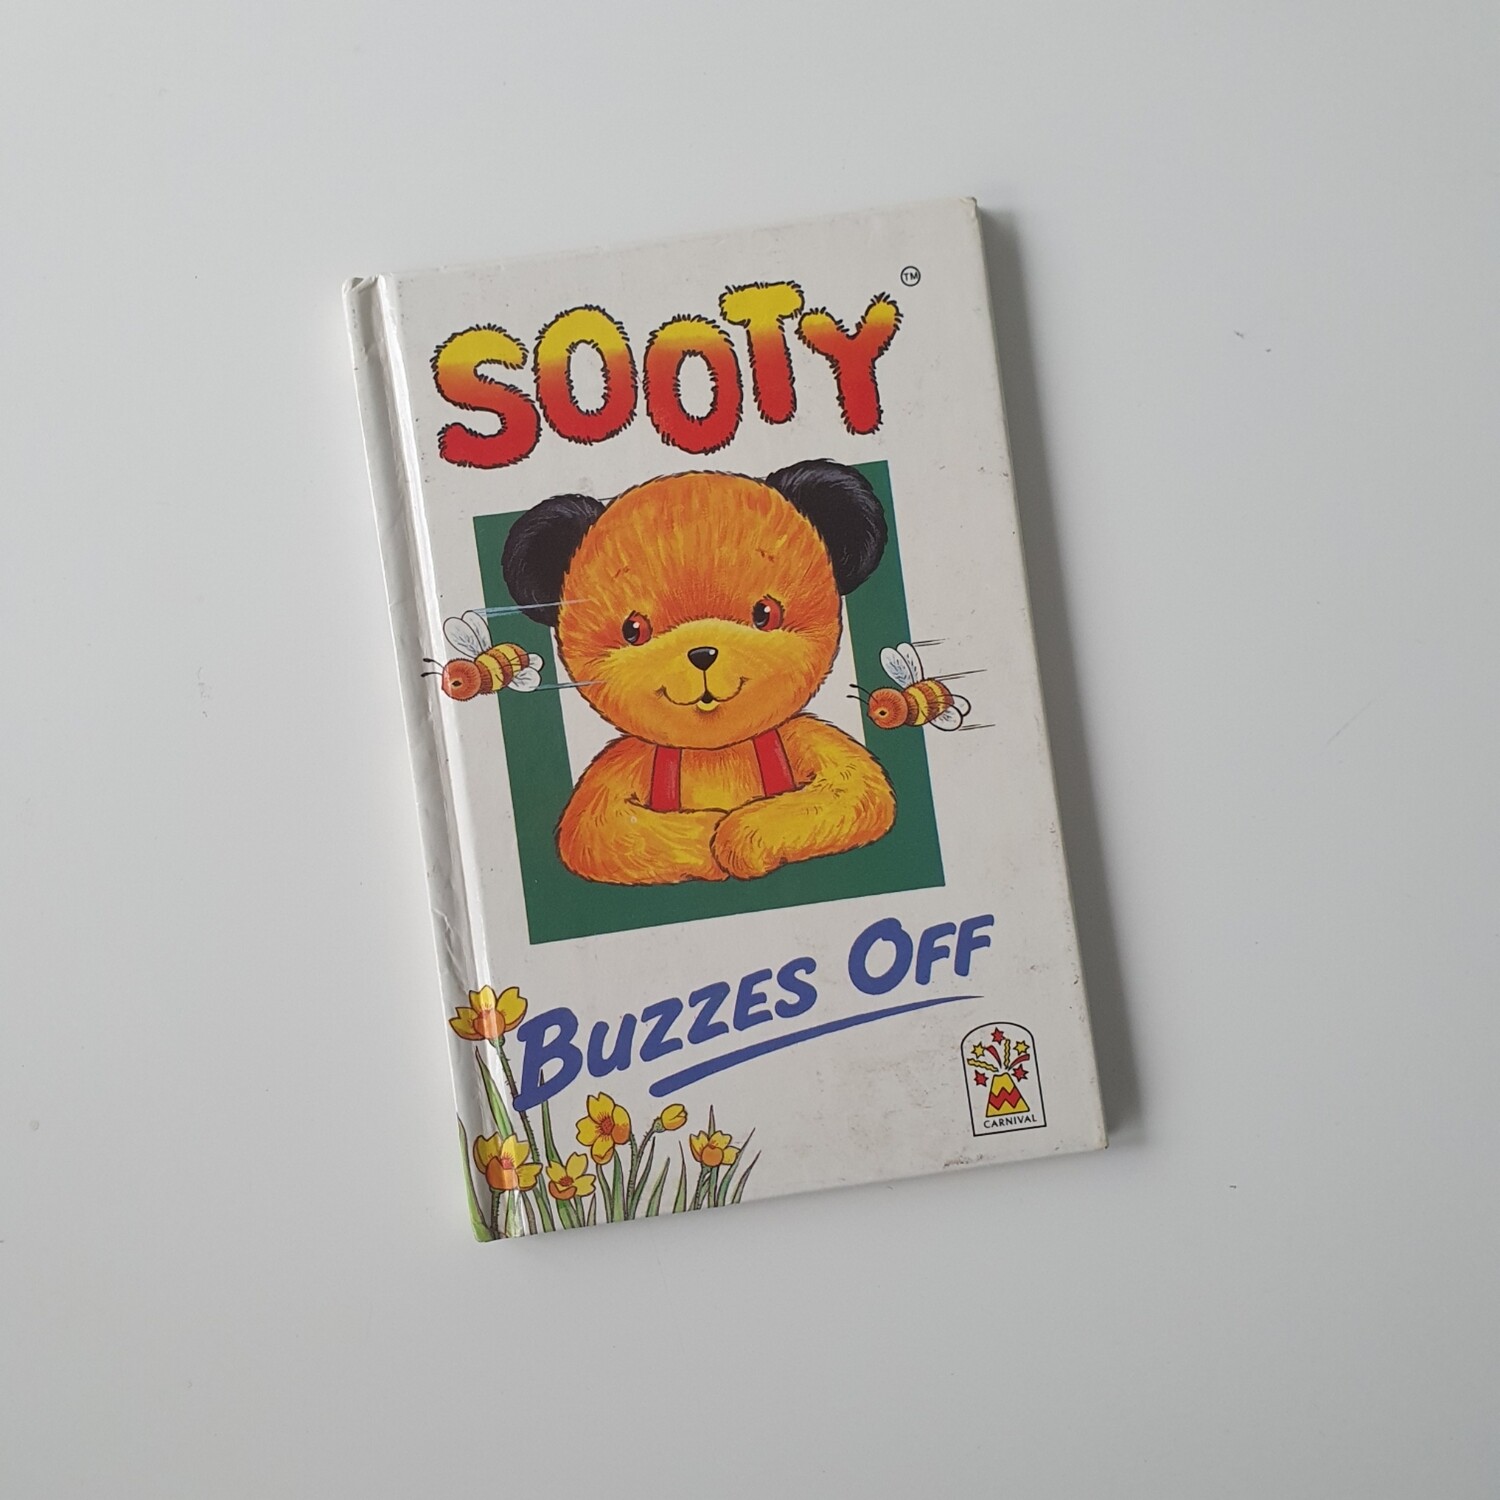 Sooty - Buzzes off